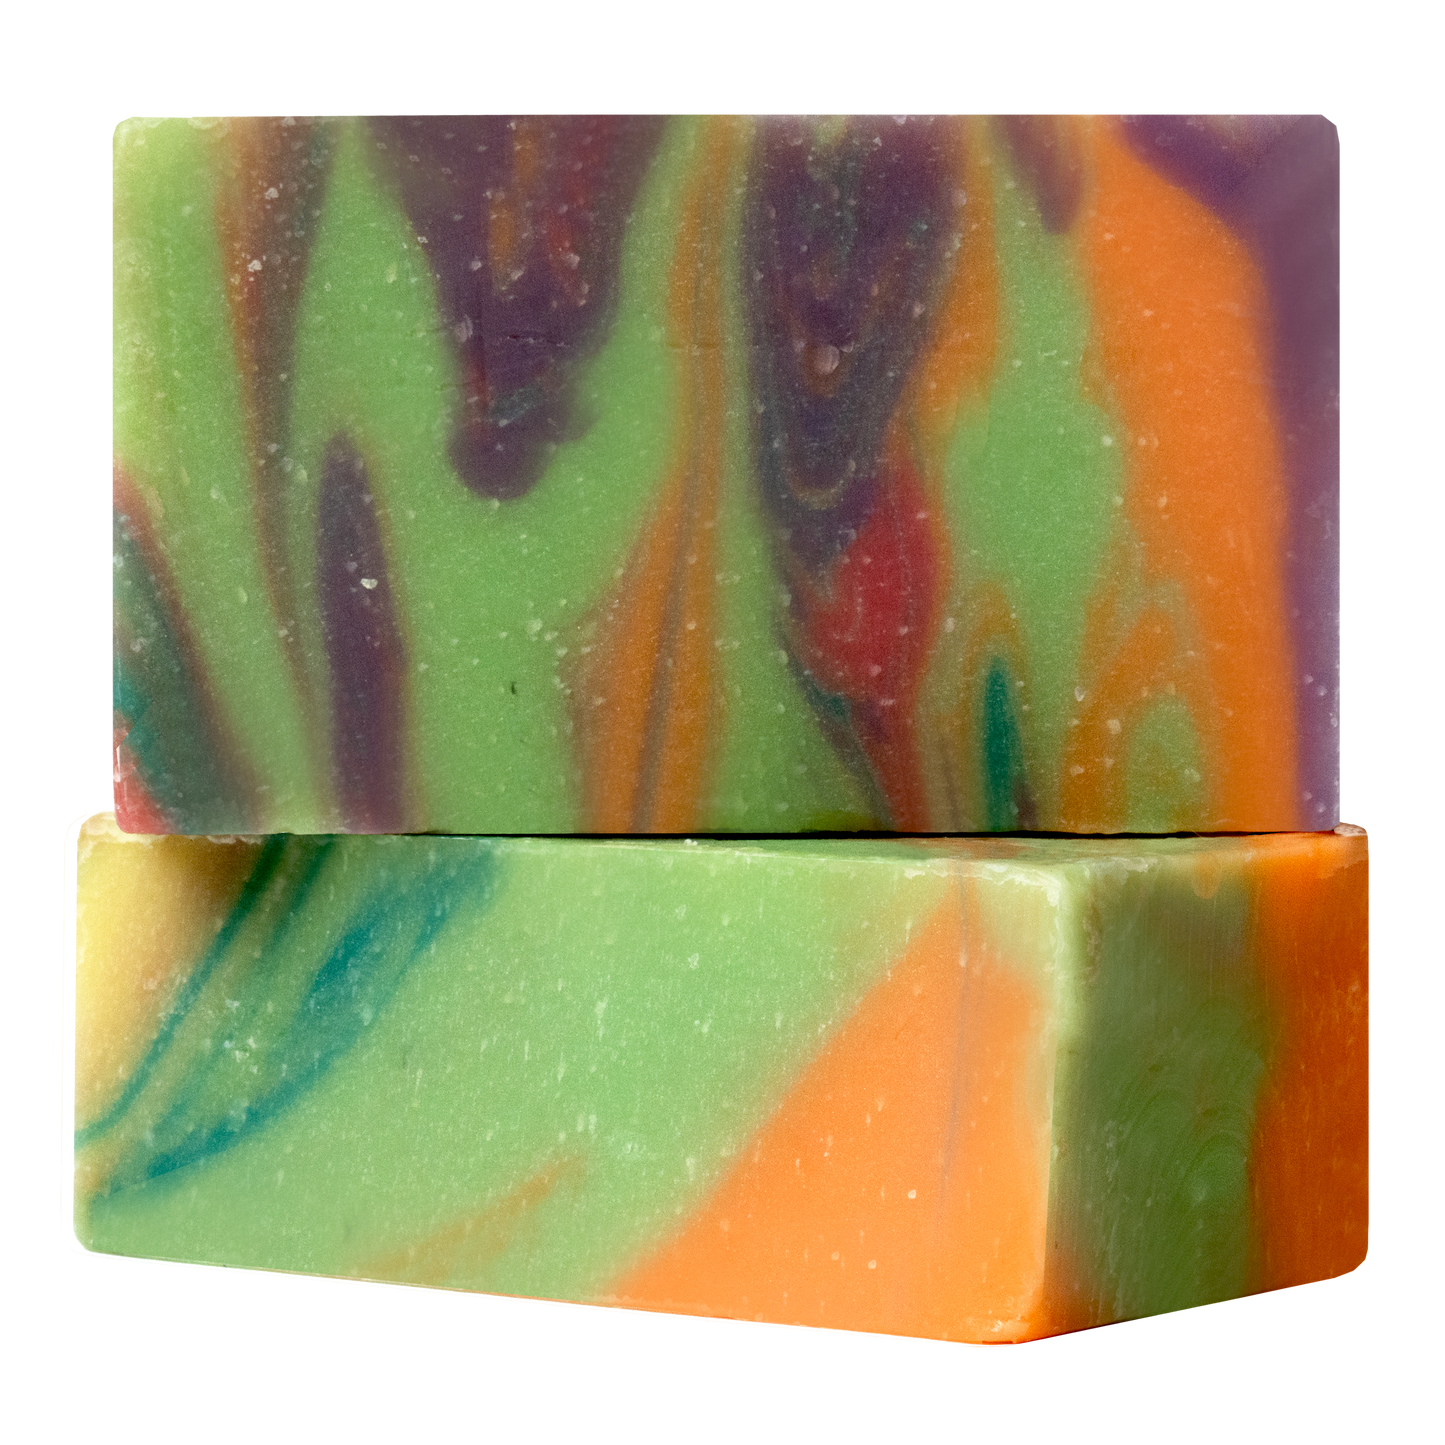 4.5 oz Natural Bar Soaps | Ready to Label